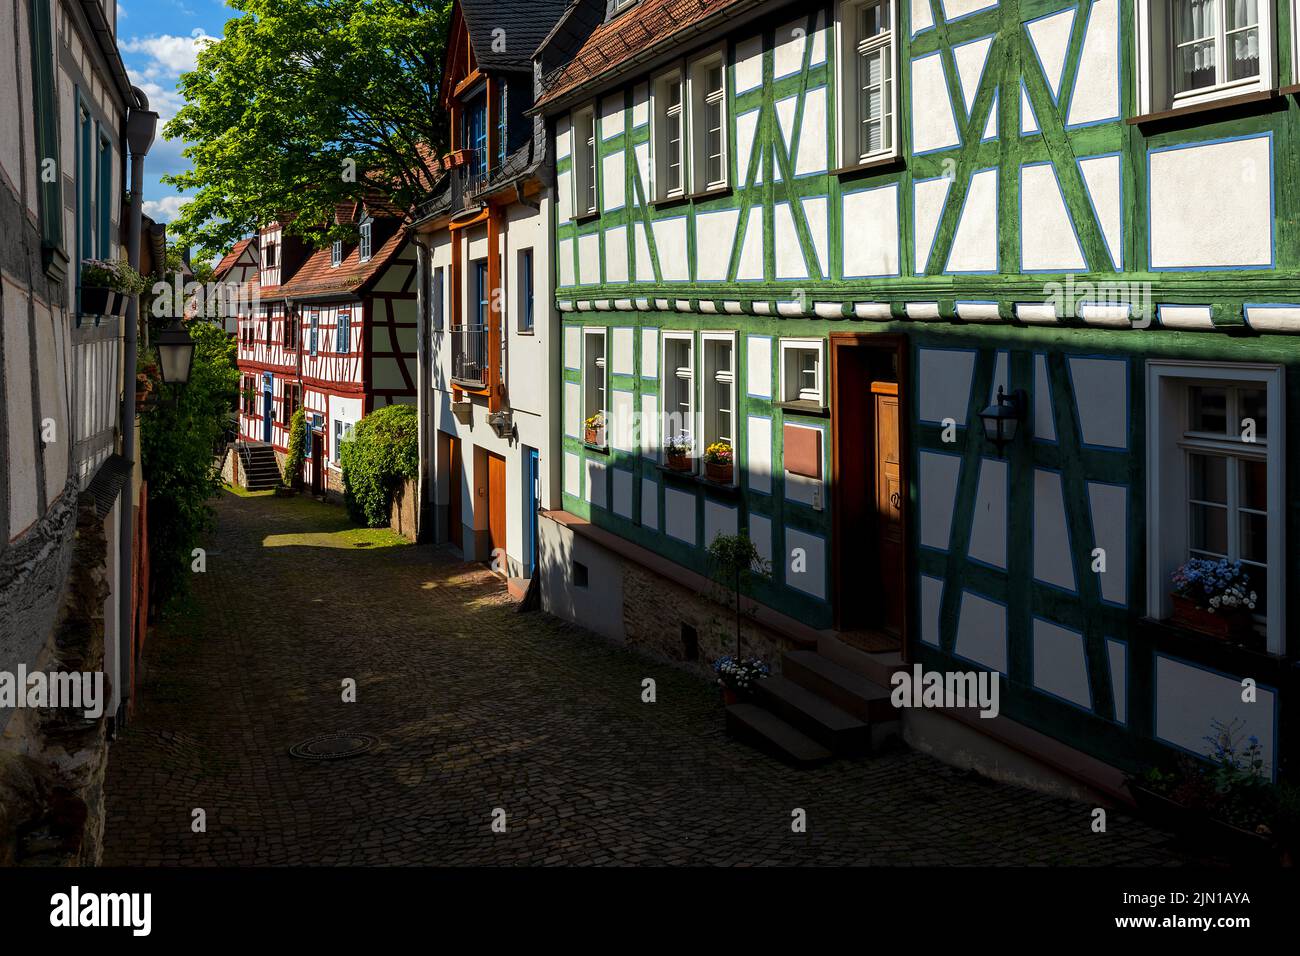 Cobblestone street in historic Idstein (typical German half-timbered town) Stock Photo